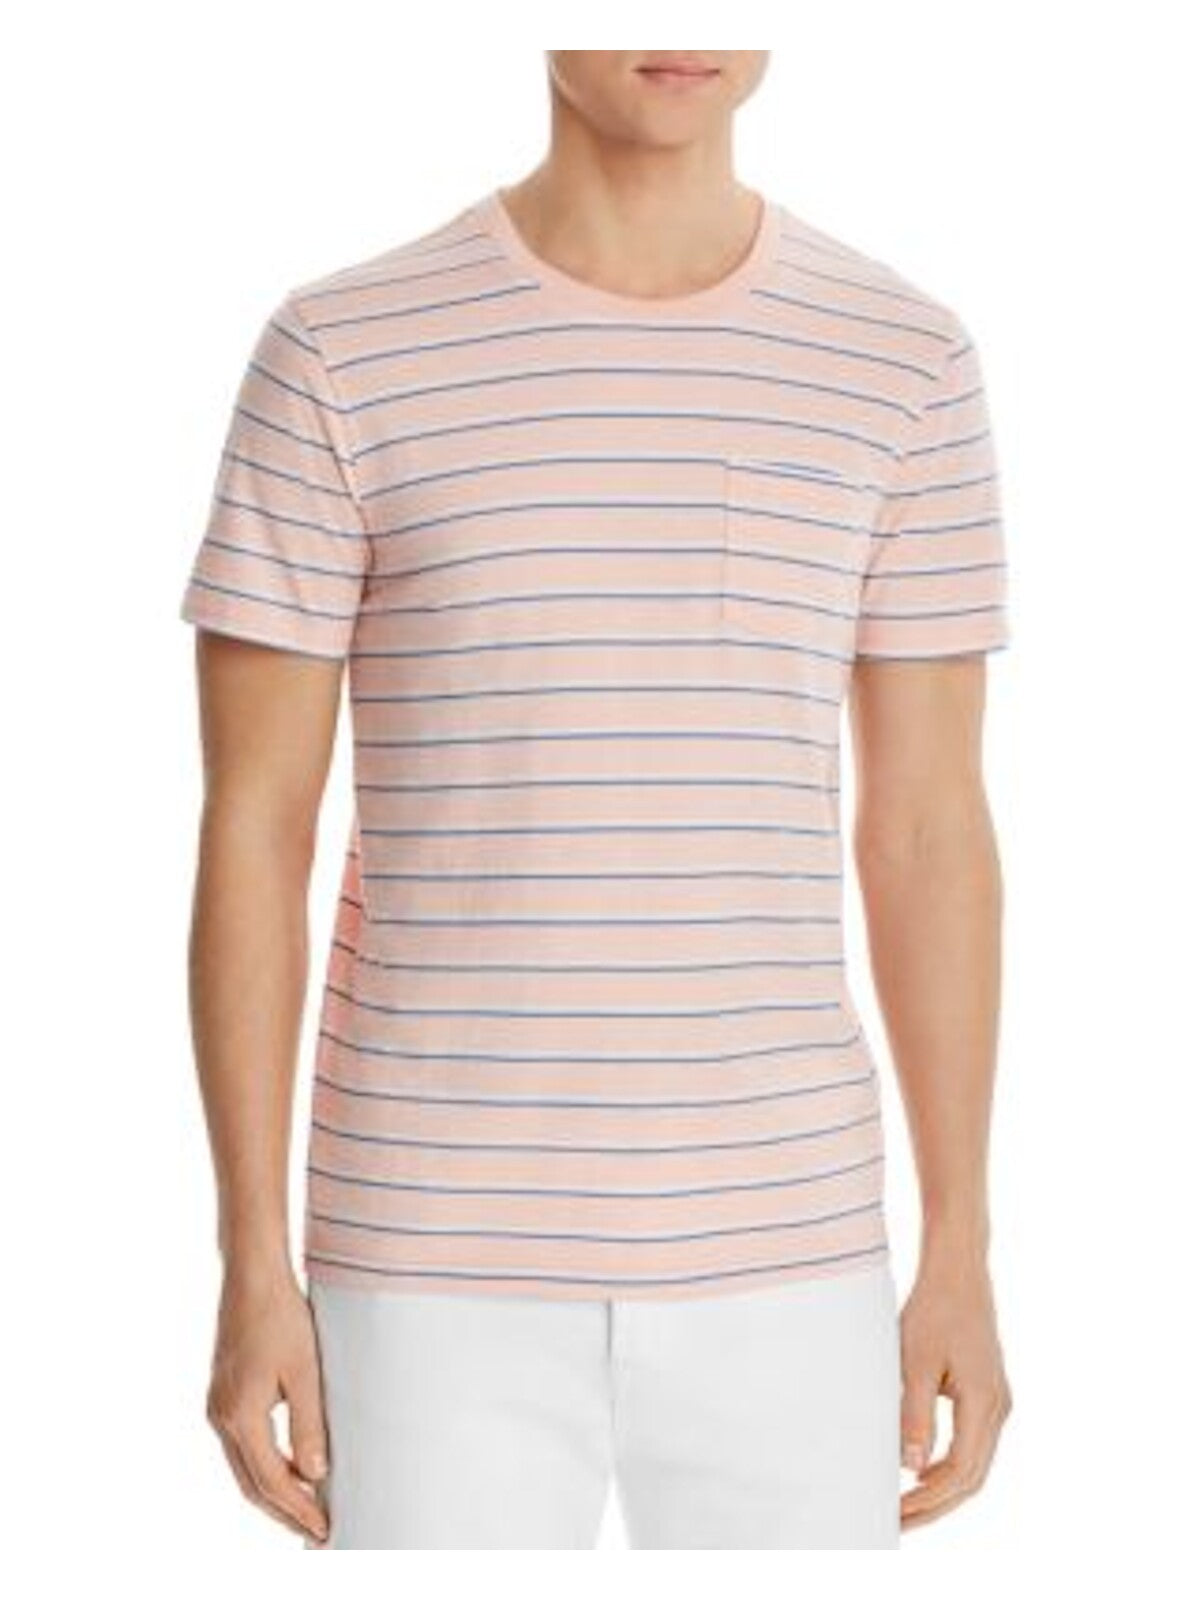 Pacific and Park Mens Pink Striped Classic Fit Cotton Blend T-Shirt S